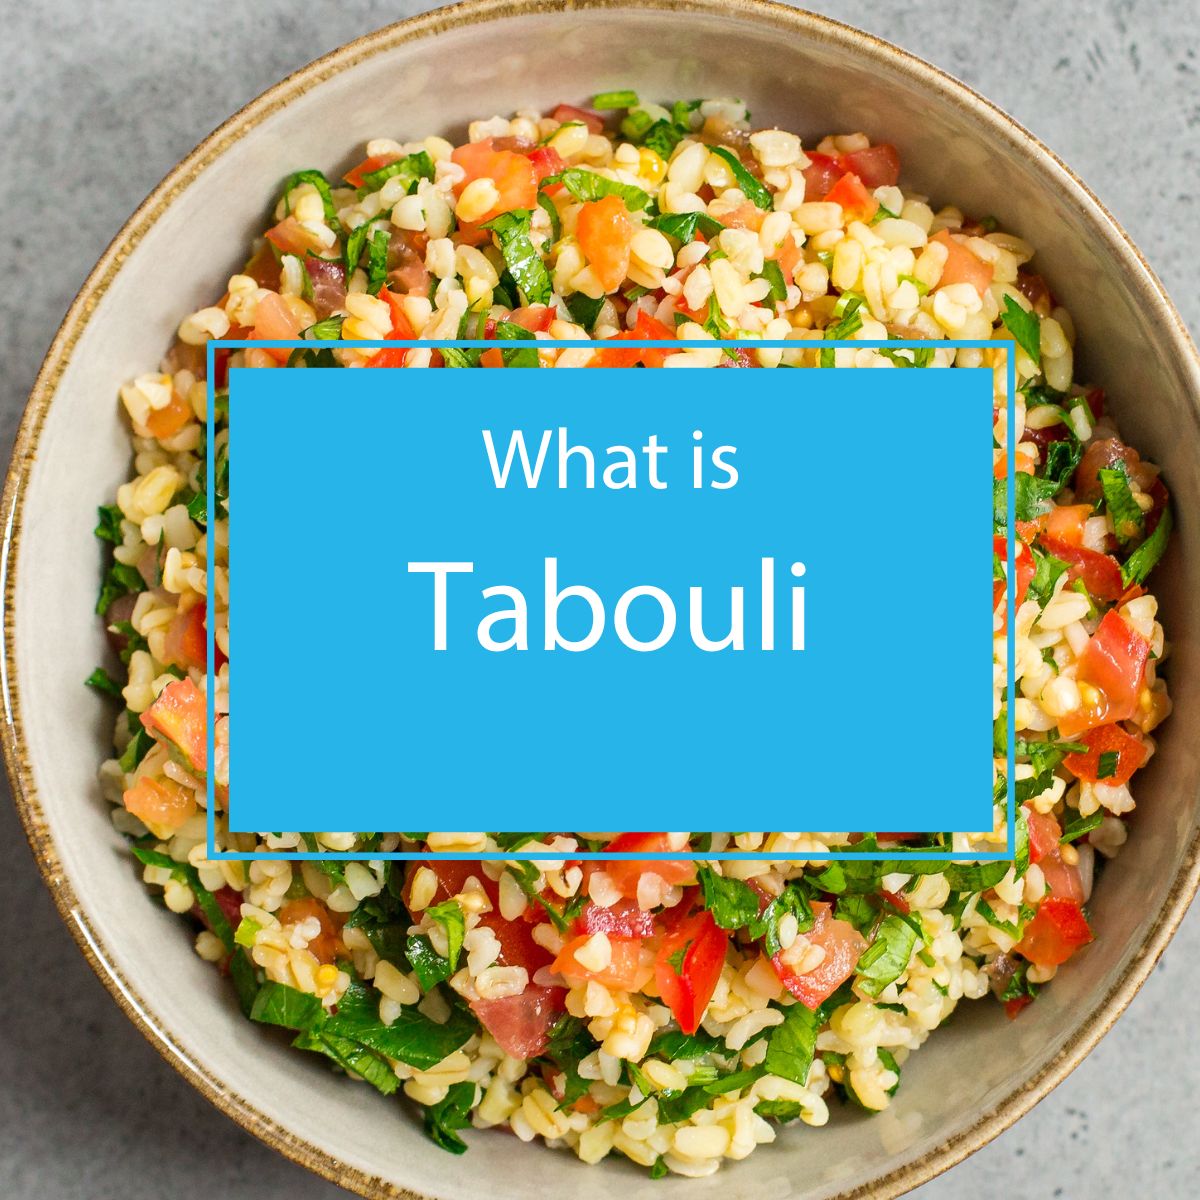 What is Tabouli